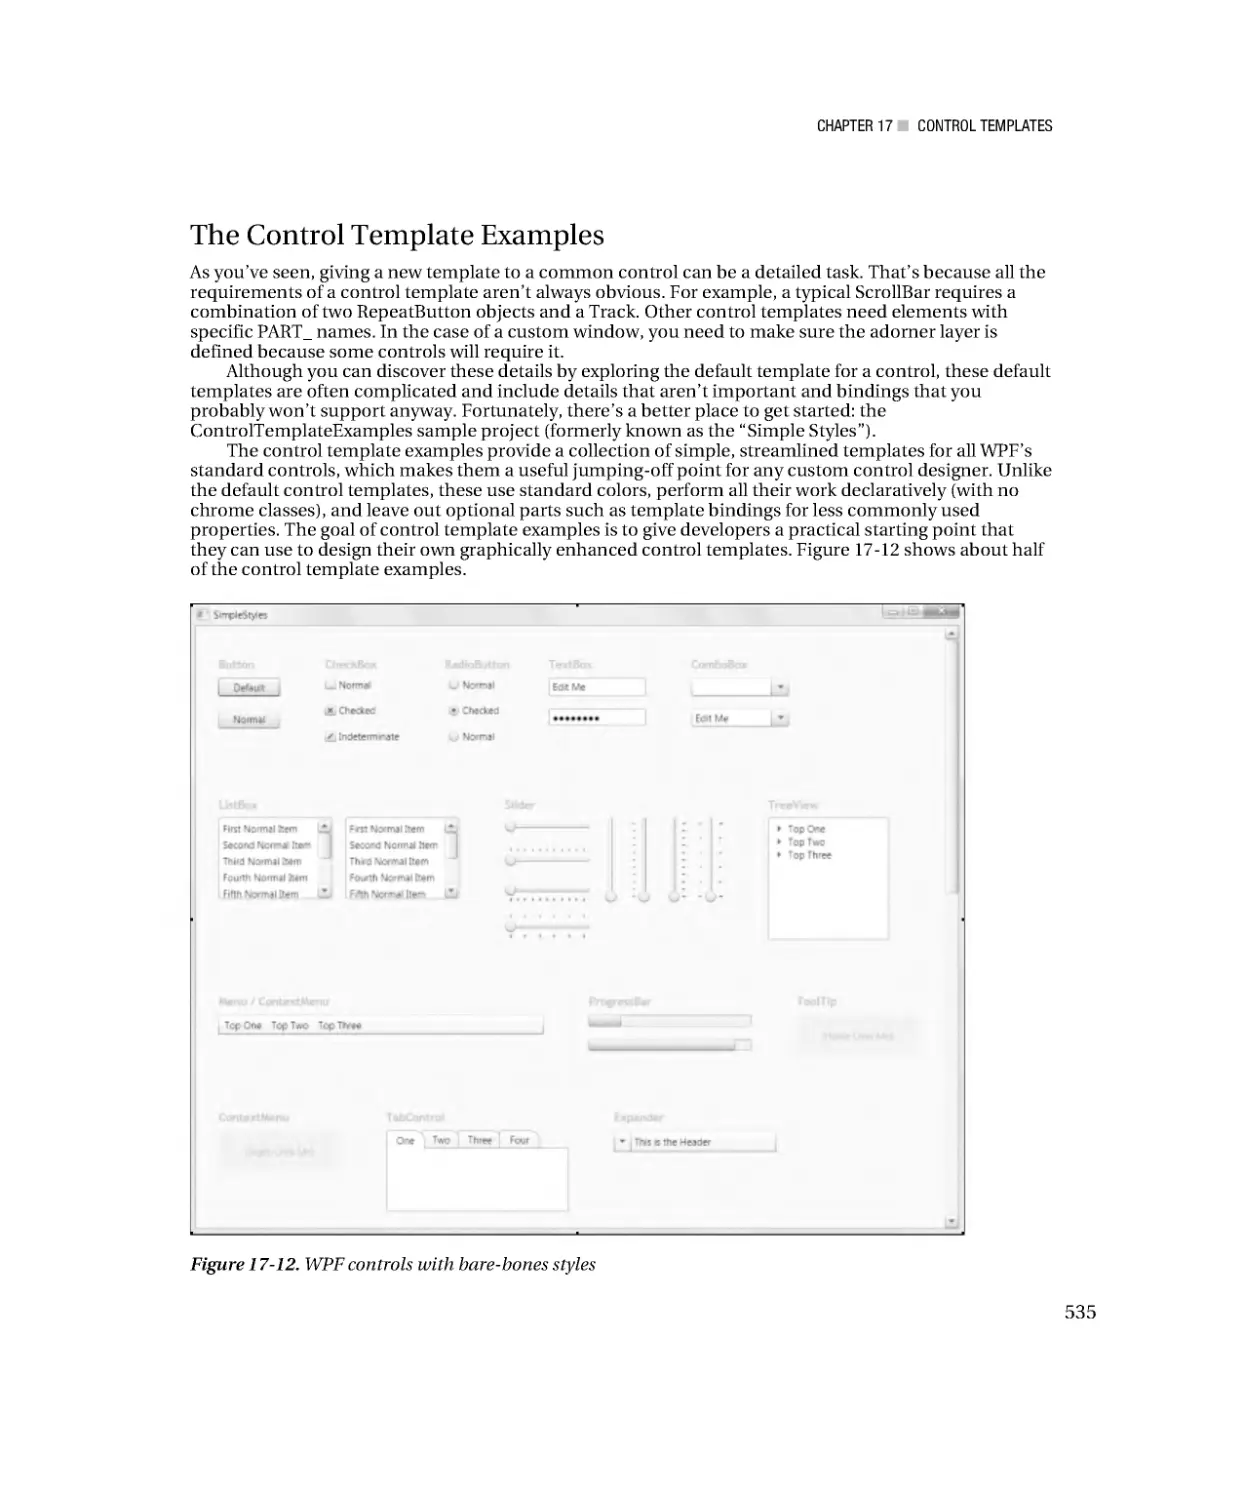 The Control Template Examples